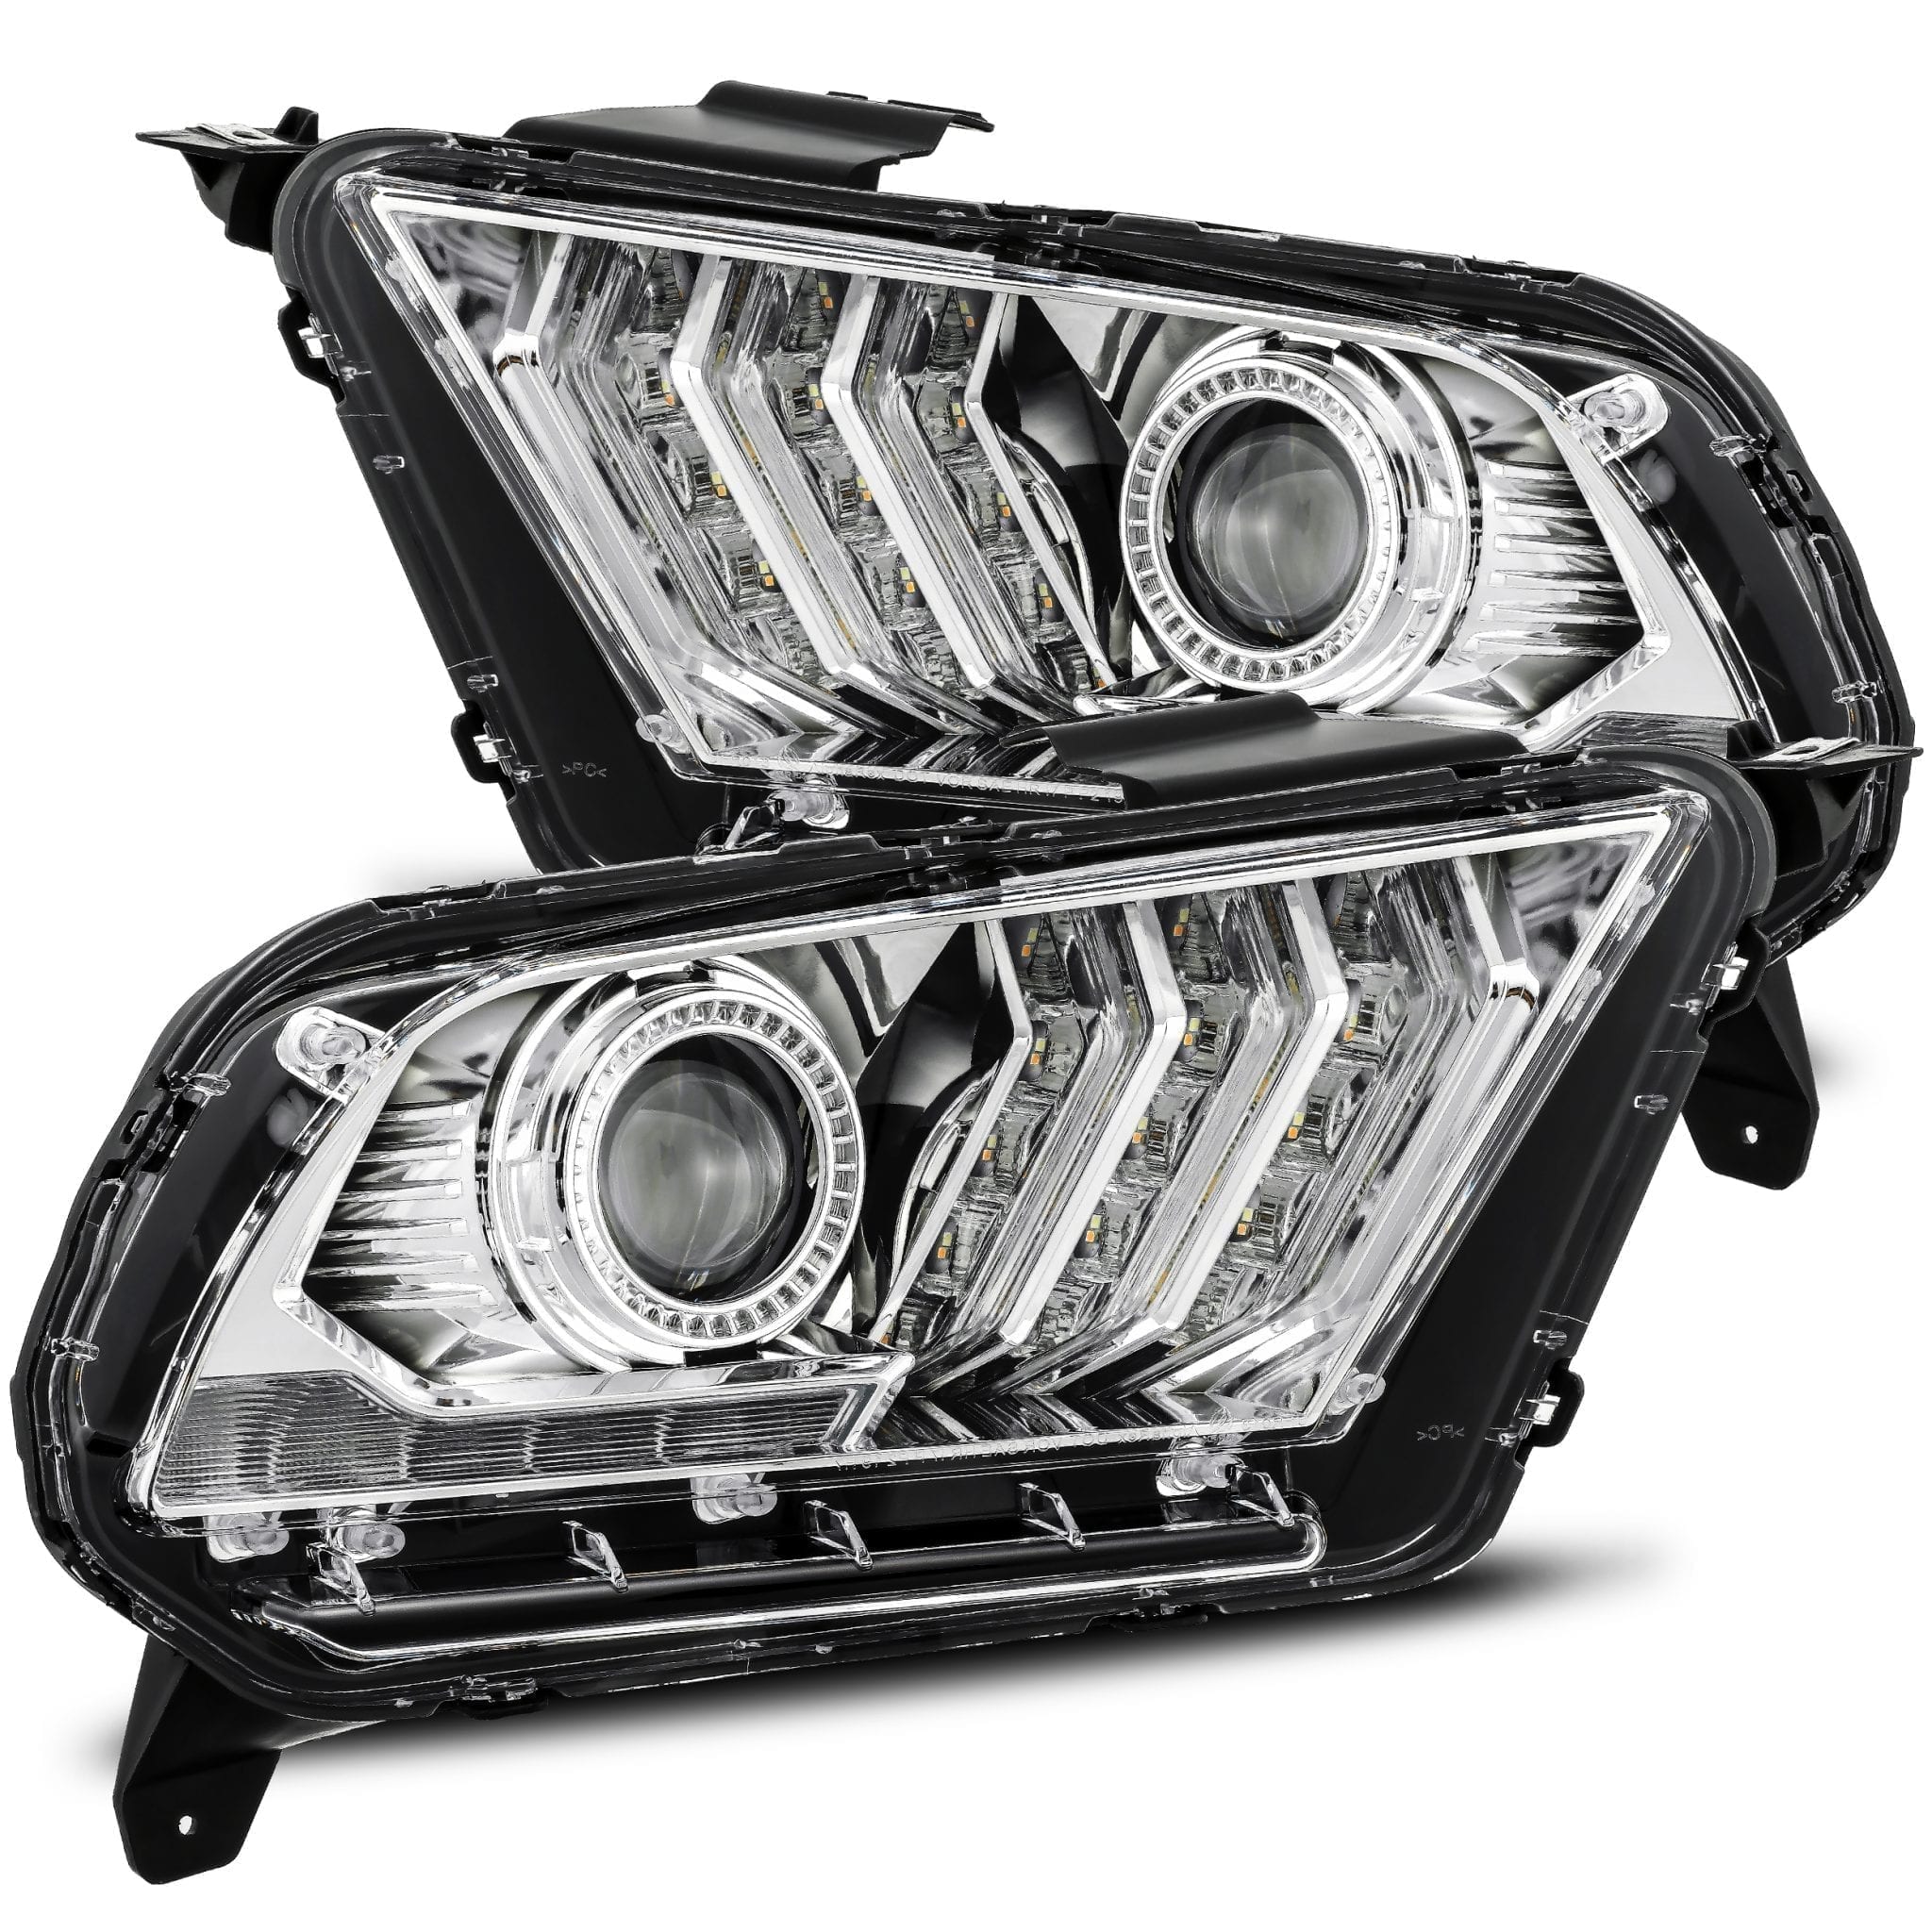 Мустанг фары. Ford Mustang Headlights. Ford Mustang 6 Headlights. Фара Мустанг фит. Mustang led.